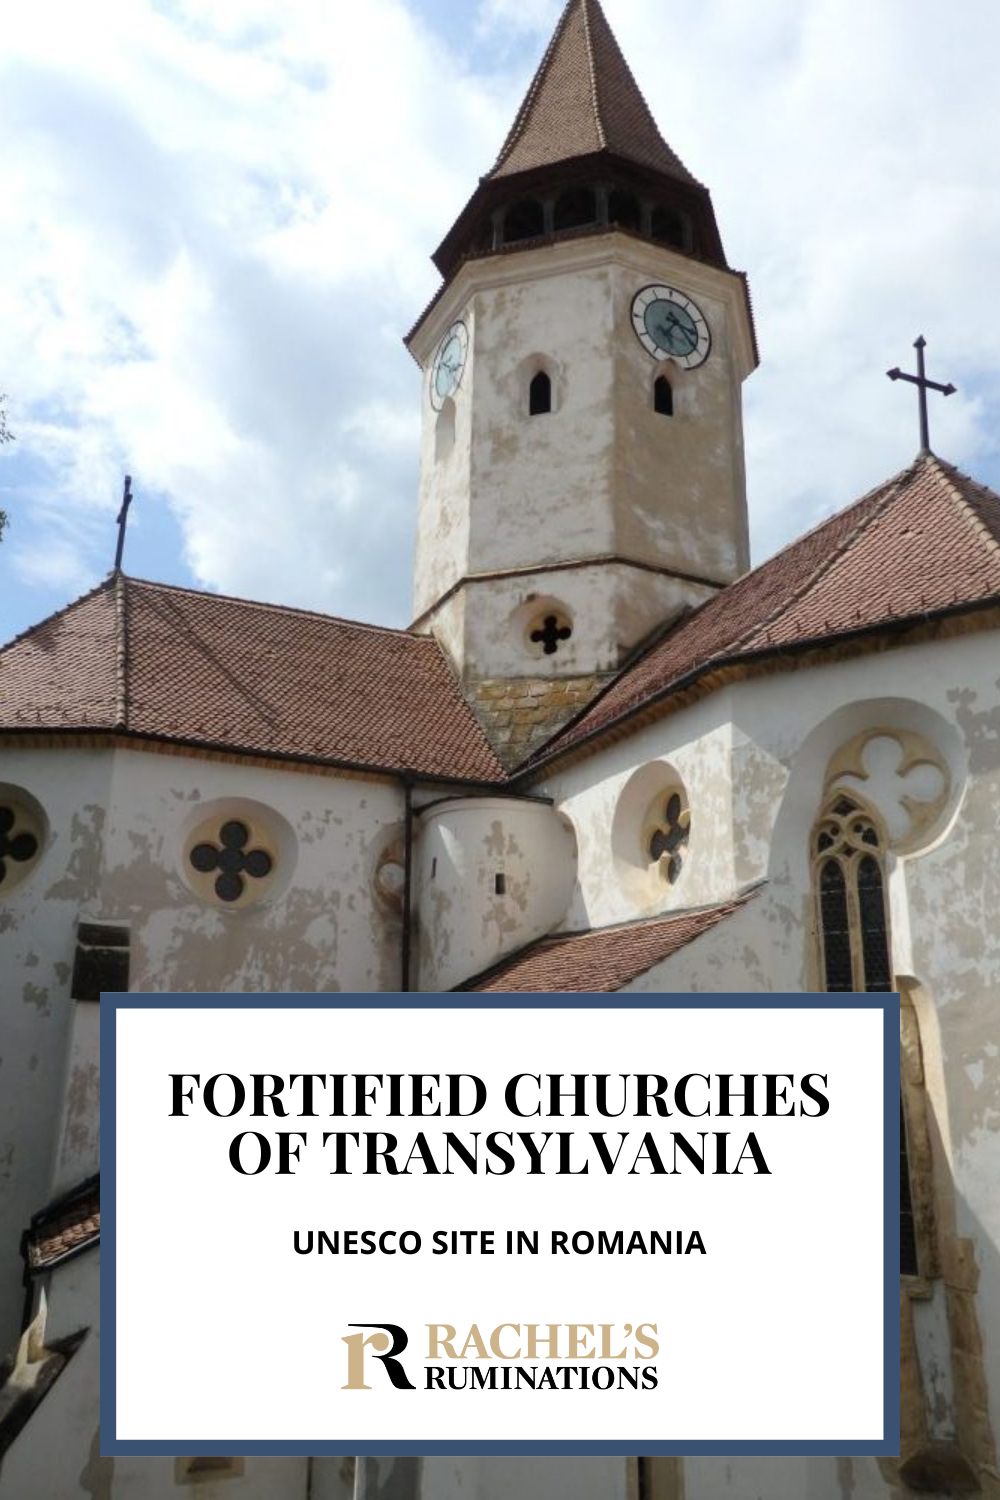 Seven of the 150 castle-like fortified churches of Transylvania make up a UNESCO World Heritage site, built by Saxon settlers in the Middle Ages. via @rachelsruminations